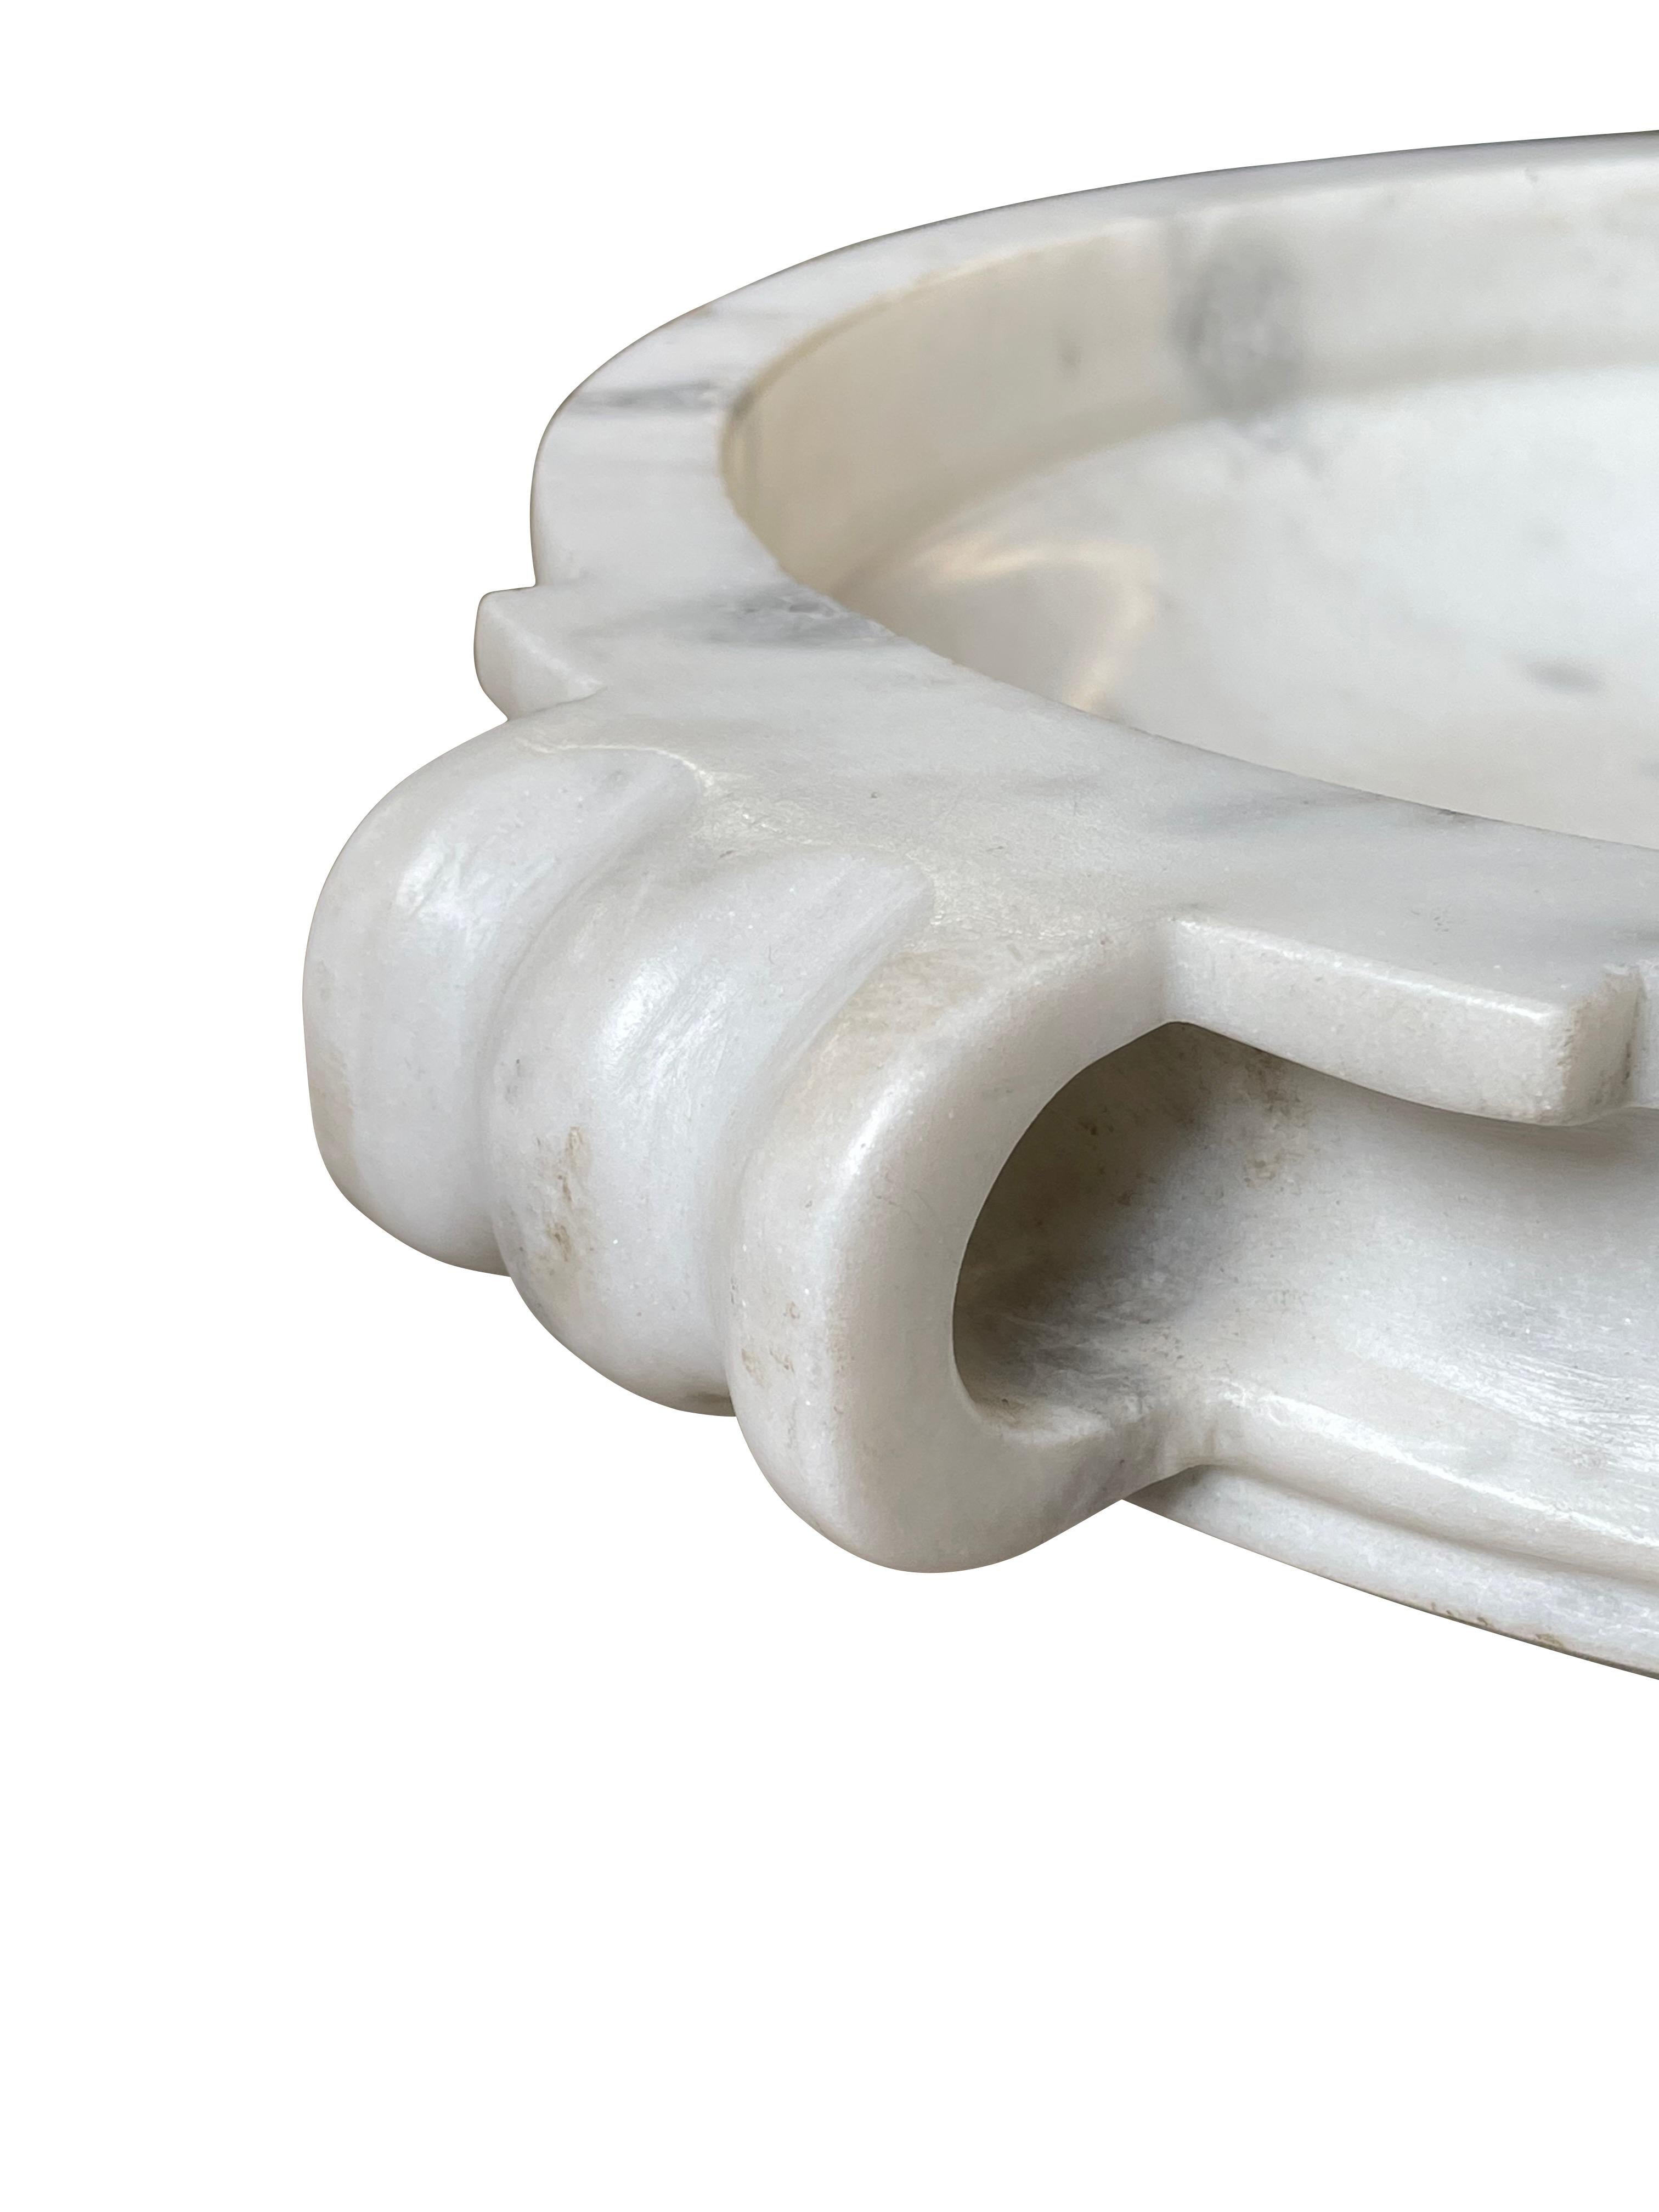 Contemporary Indian two handle smooth marble bowl.
Honed finish.
Two available and sold individually.
